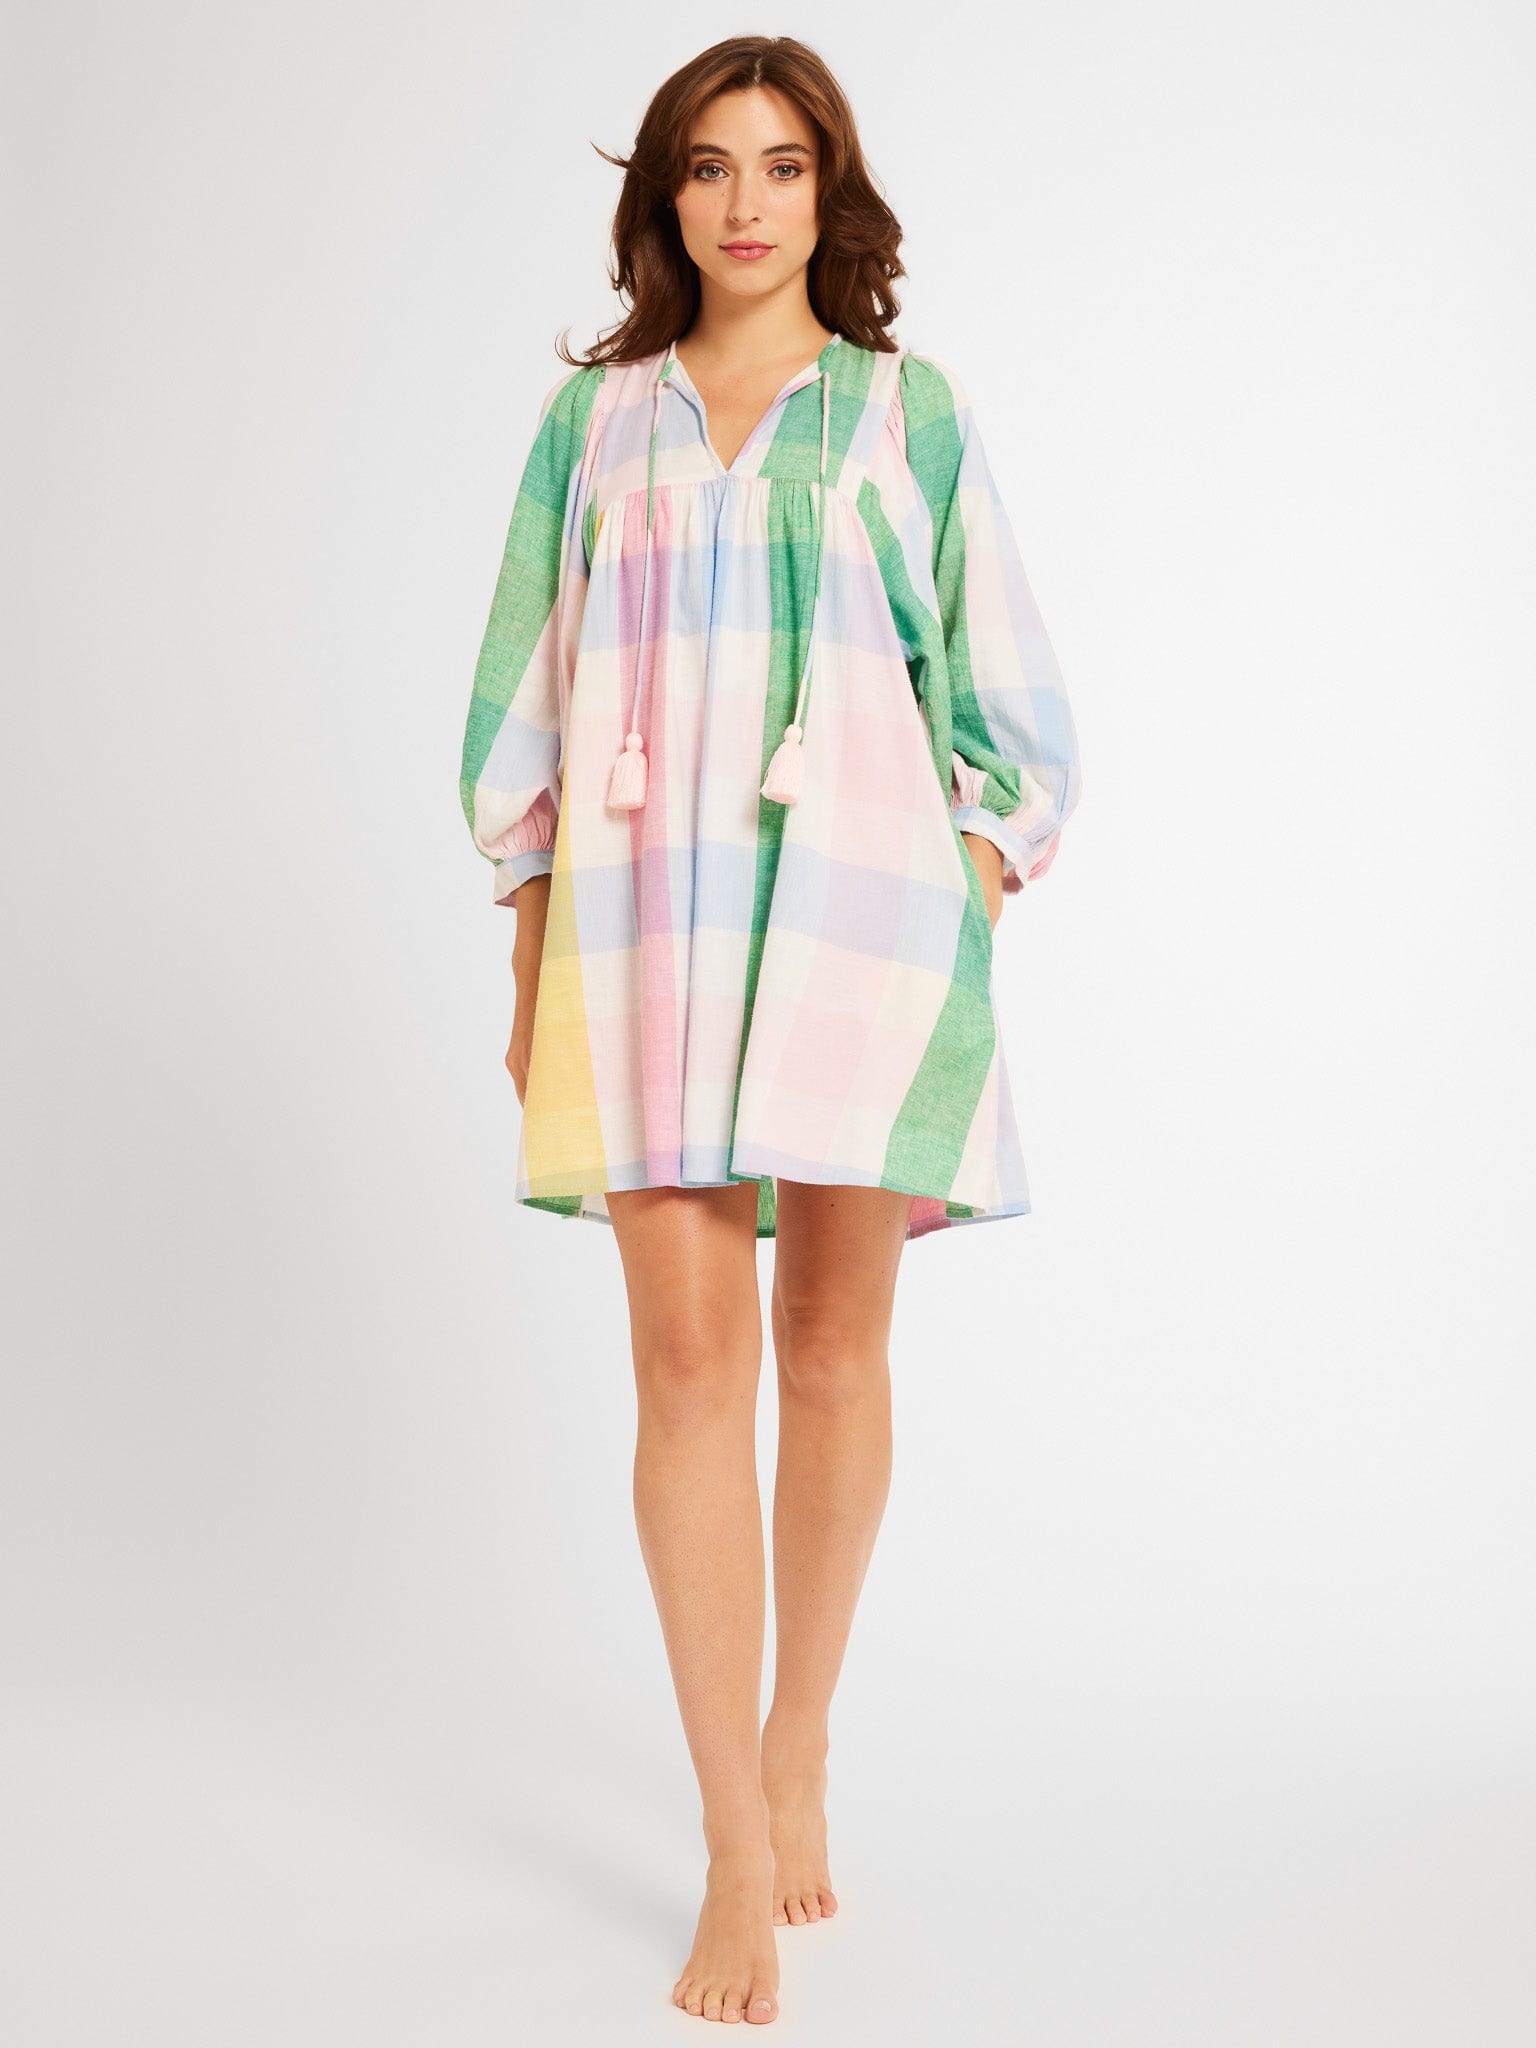 MILLE Clothing Daisy Dress in Pastel Plaid